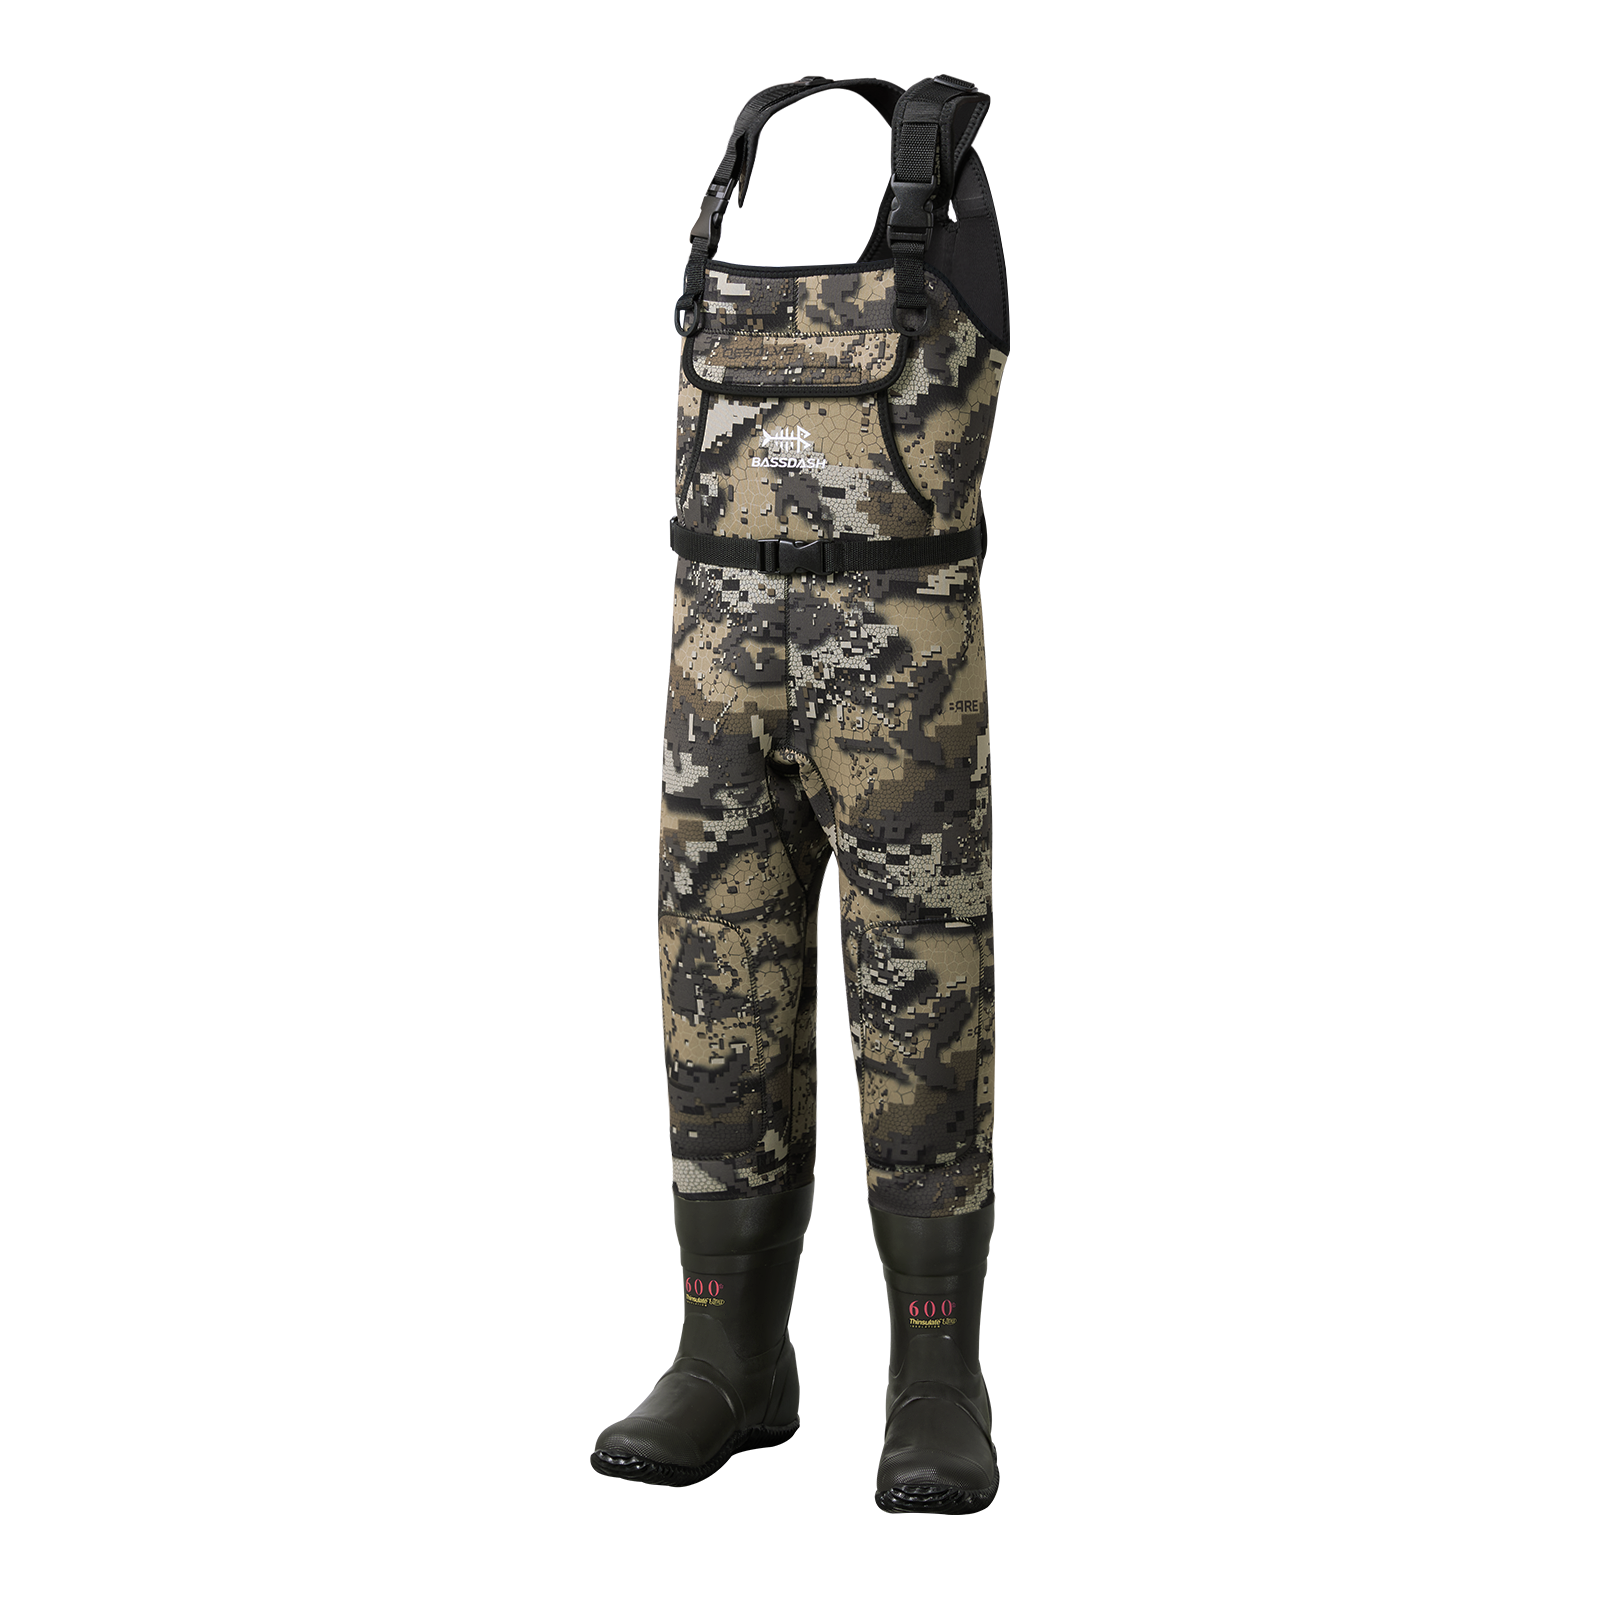 Insulated Fishing Waders Boots, Mens Fishing Waders Boots